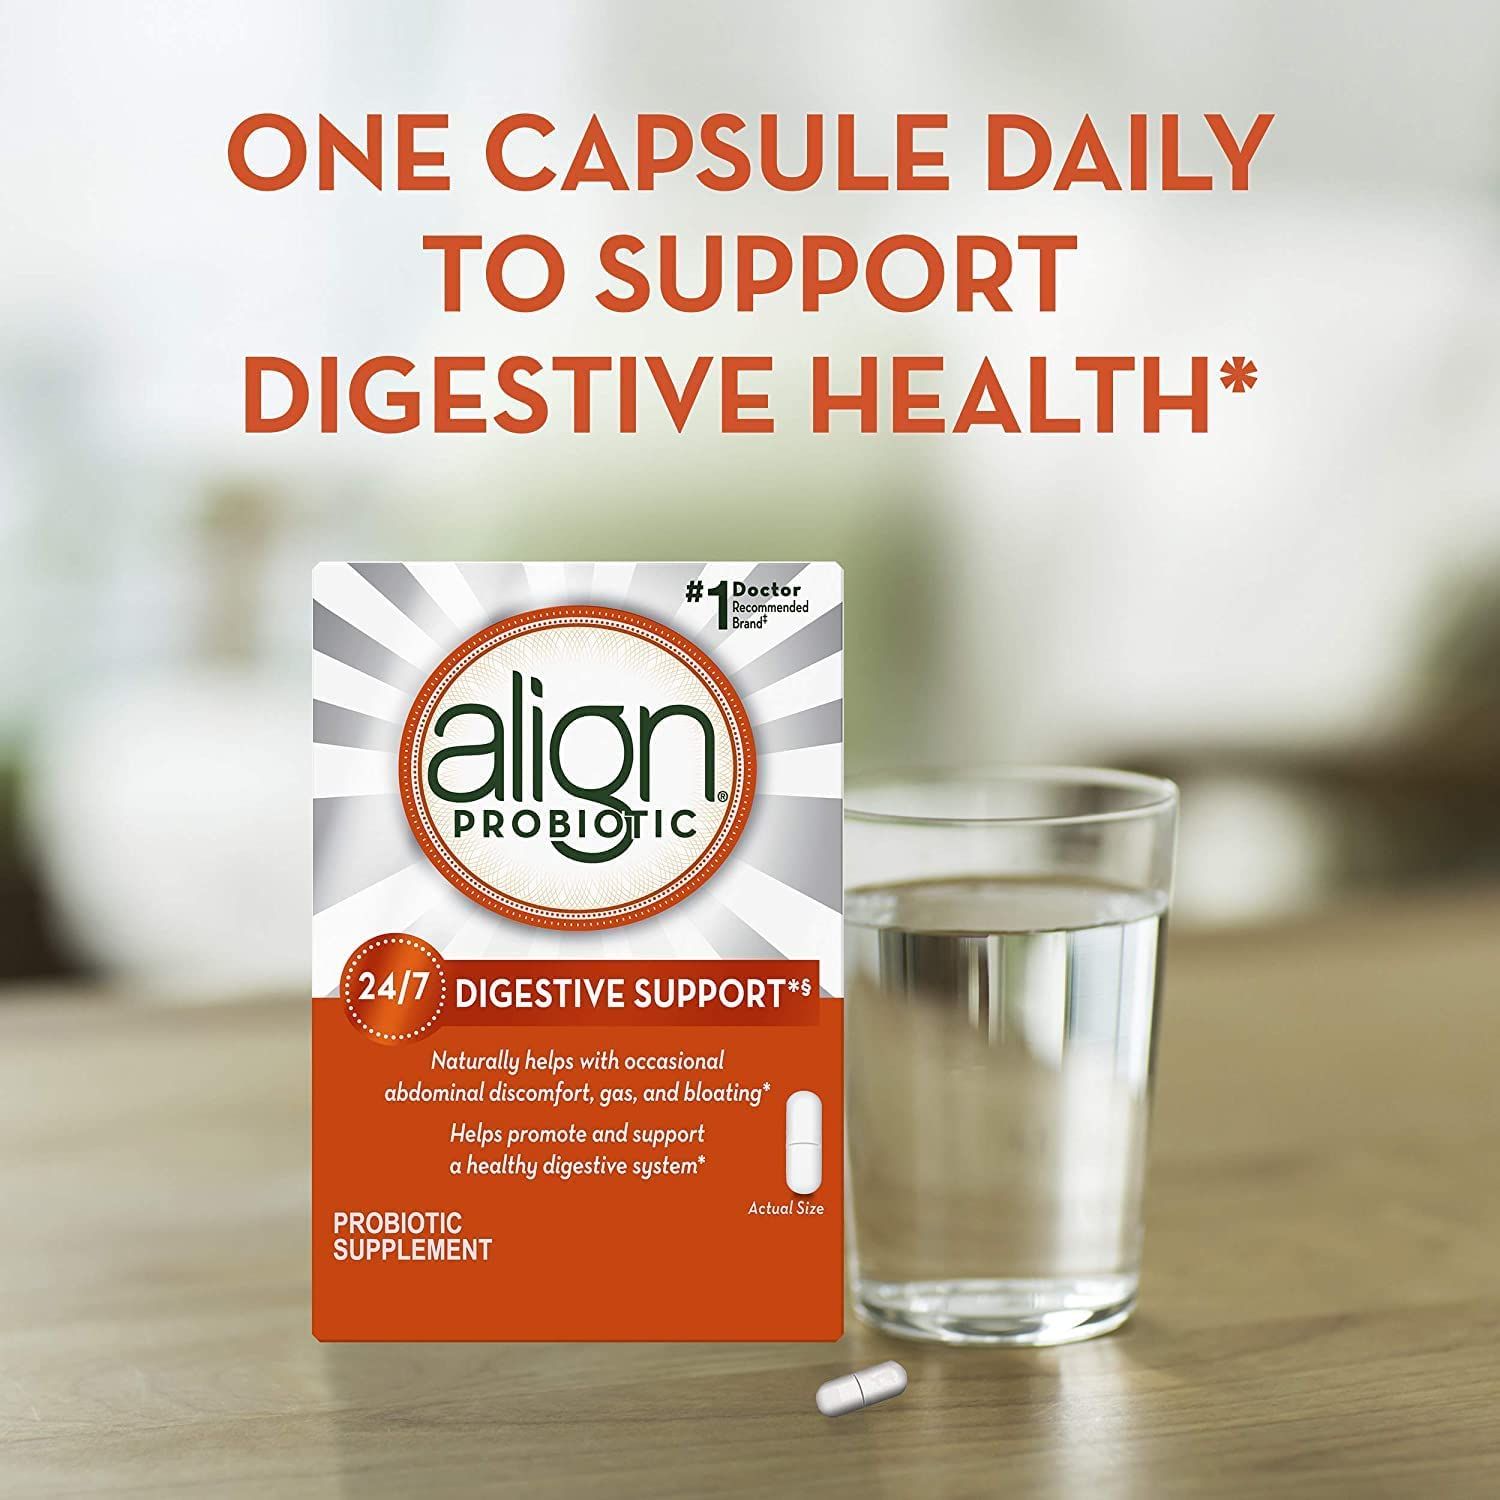 Align Probiotic Daily Digestive Health Supplement Capsules - 28 ct